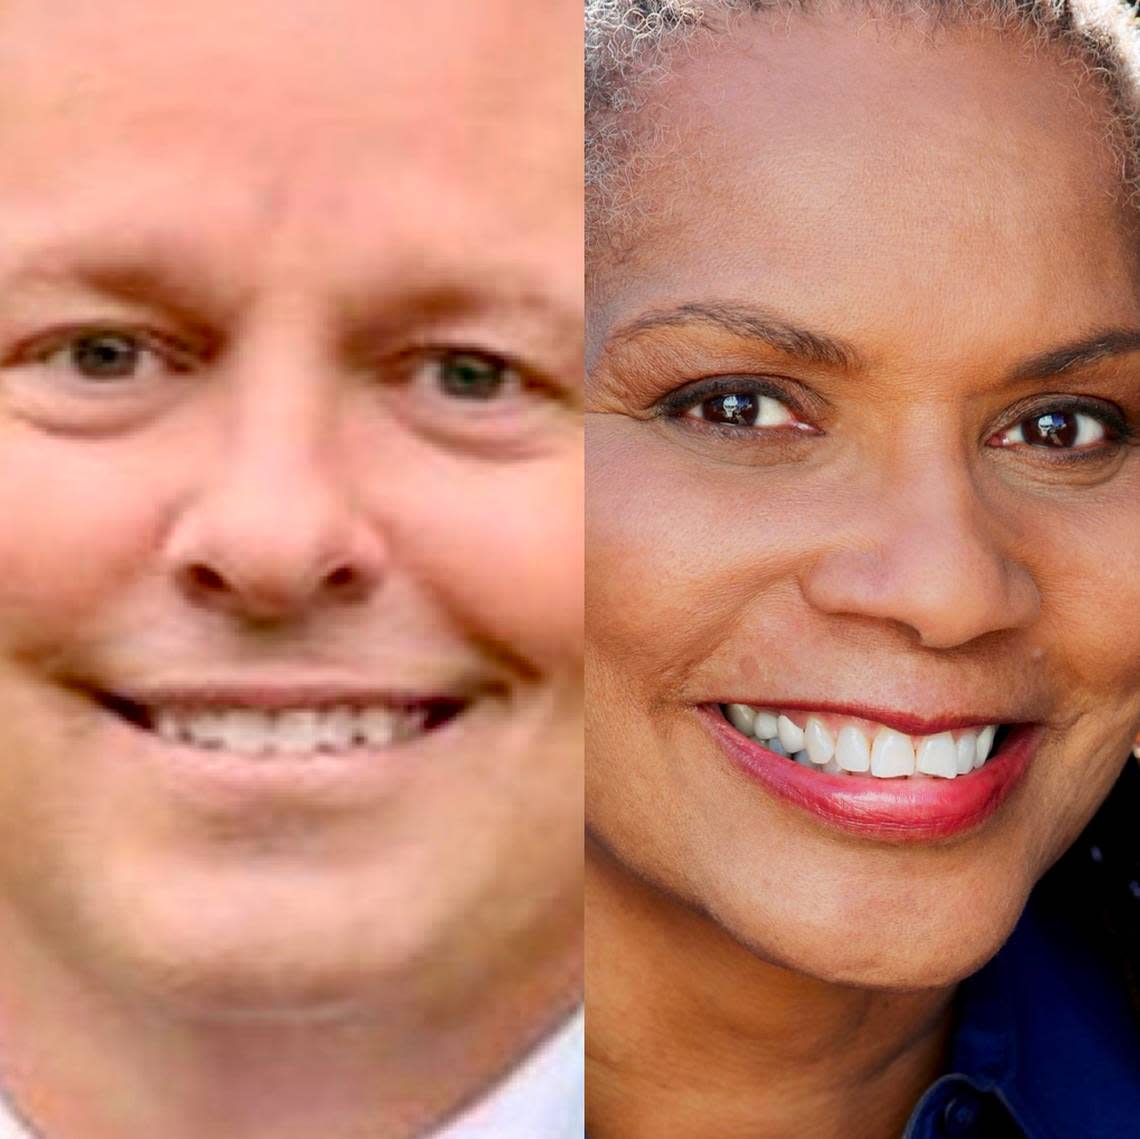 Tim O’Hare, left, and Deborah Peoples will meet in the race to lead Tarrant County as county judge.